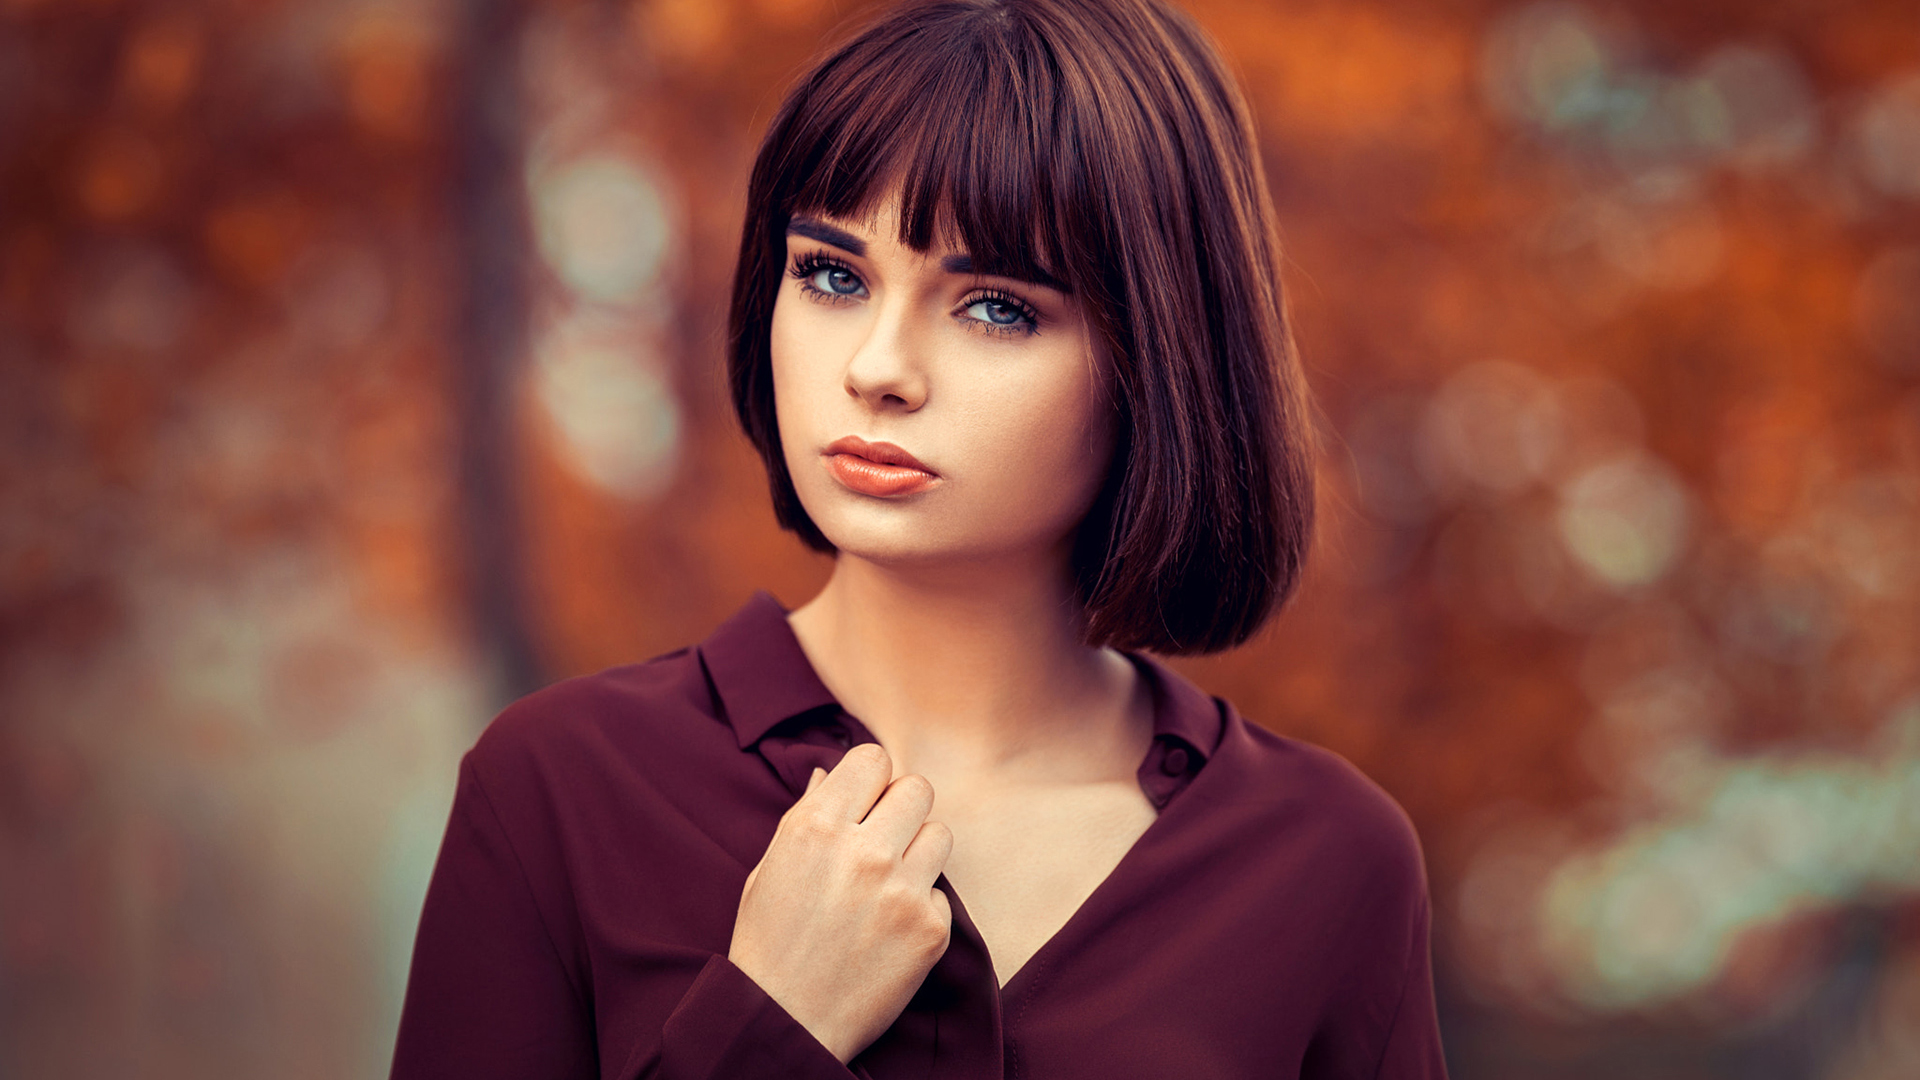 Girl Model With Short Hair Is Wearing A Maroon Shirt 2K Model